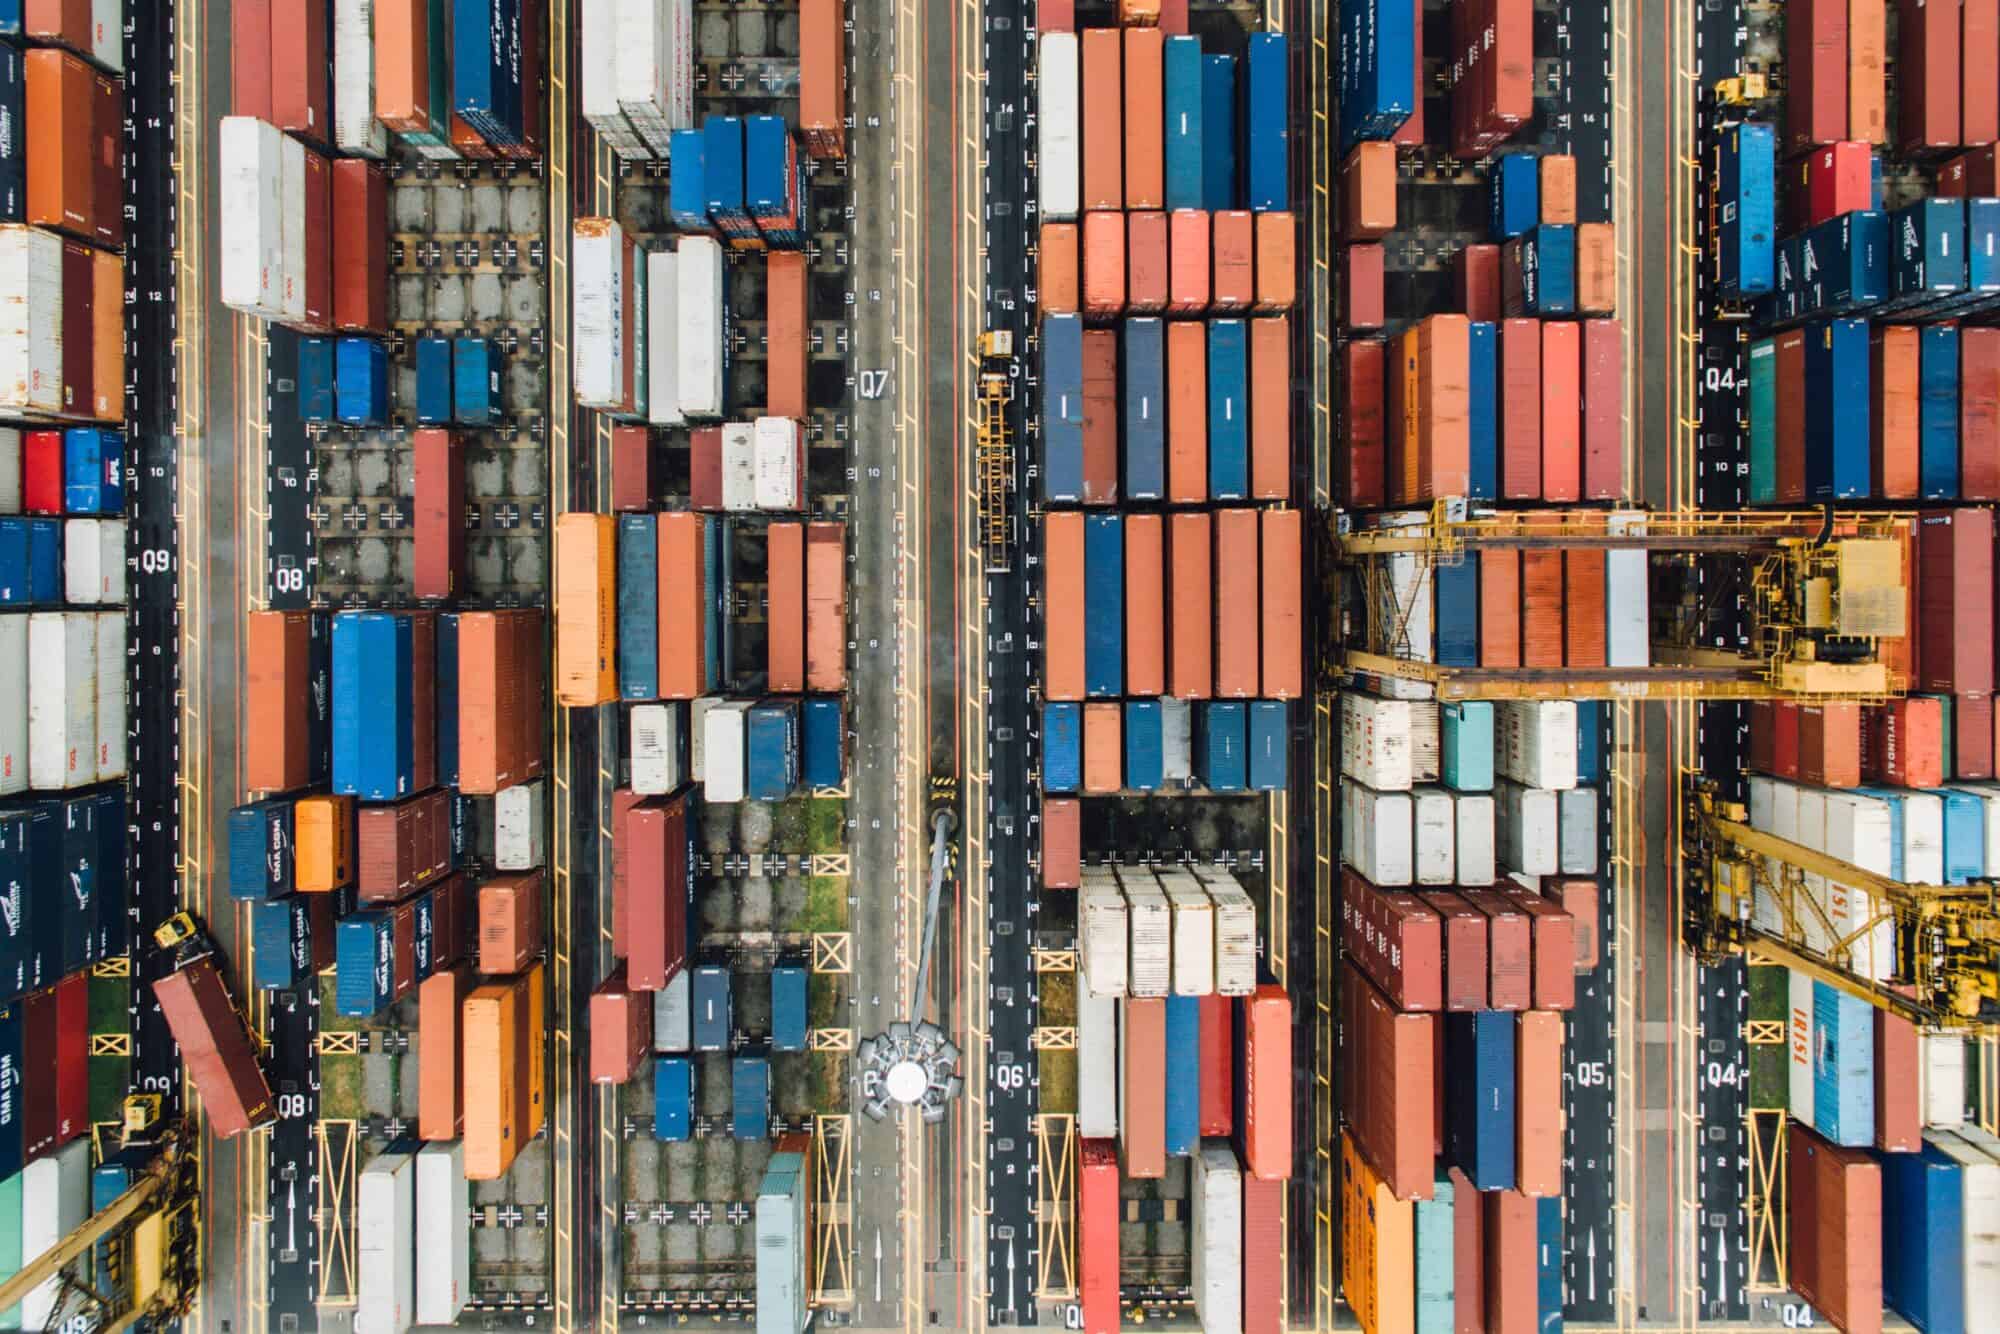 Aerial view of a shipping container yard.